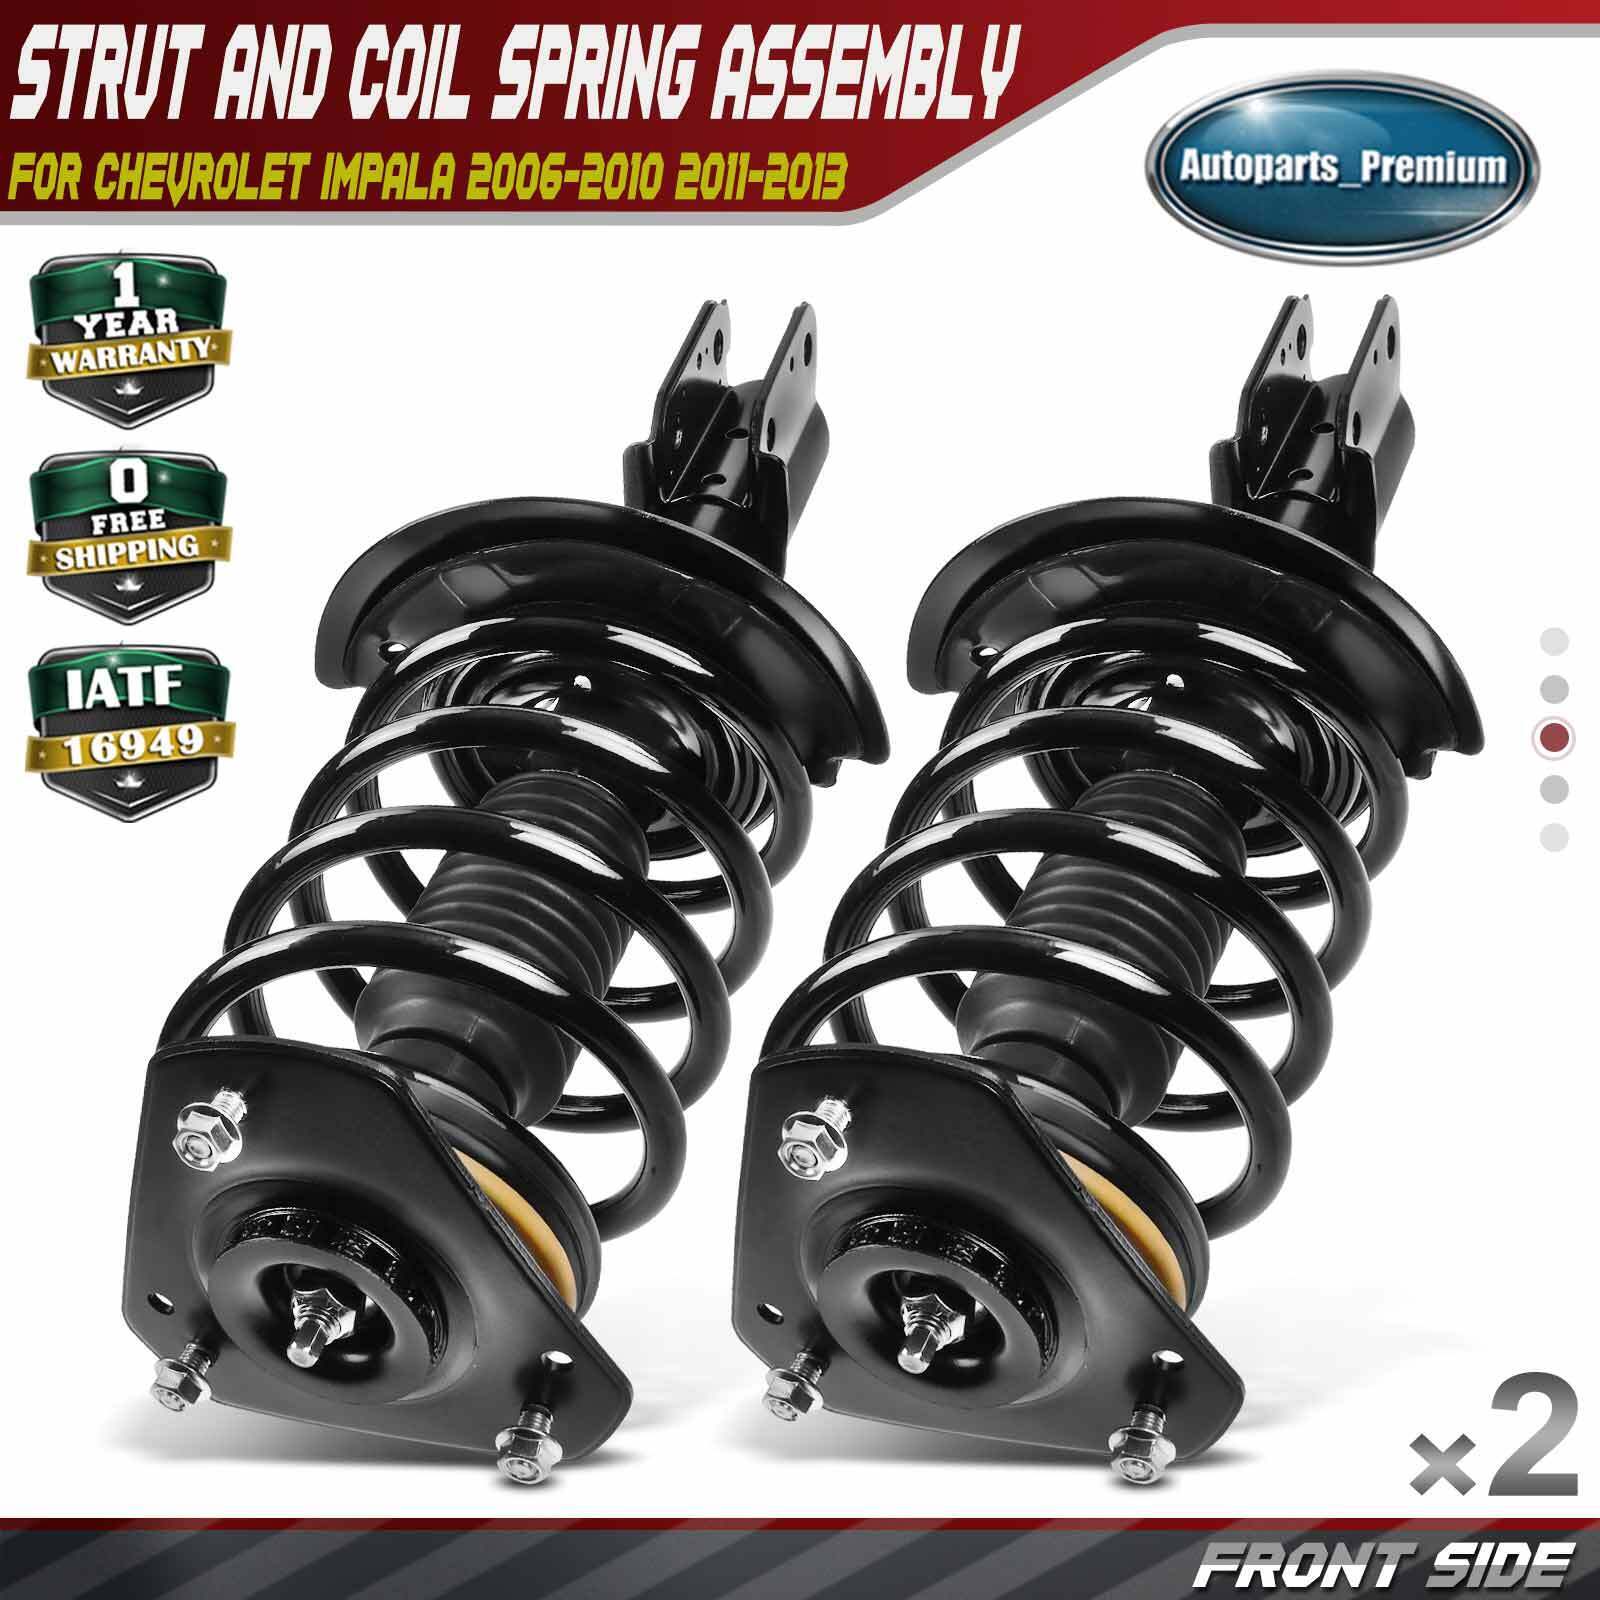 2x Front Complete Struts & Coil Spring for Chevrolet Impala 2006-2013 Limited